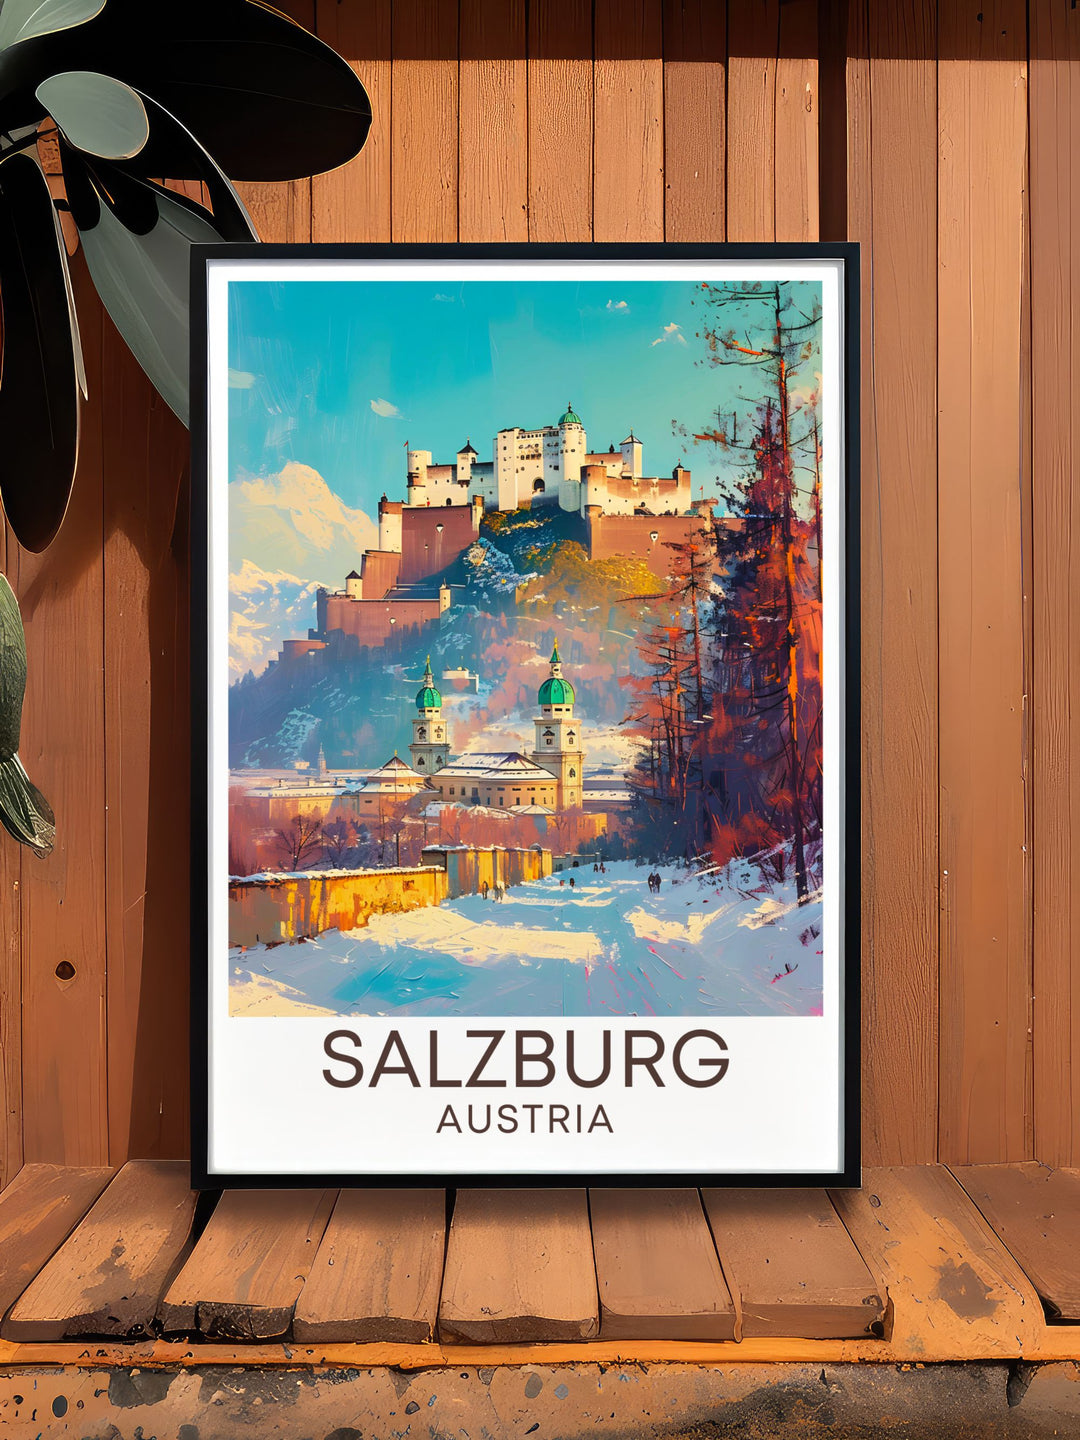 Hohensalzburg Fortress and Zauchensee skiing make for stunning wall art. Perfect for your home decor, this print captures the excitement of skiing and the historical beauty of Salzburg. A unique addition to any travel poster collection.